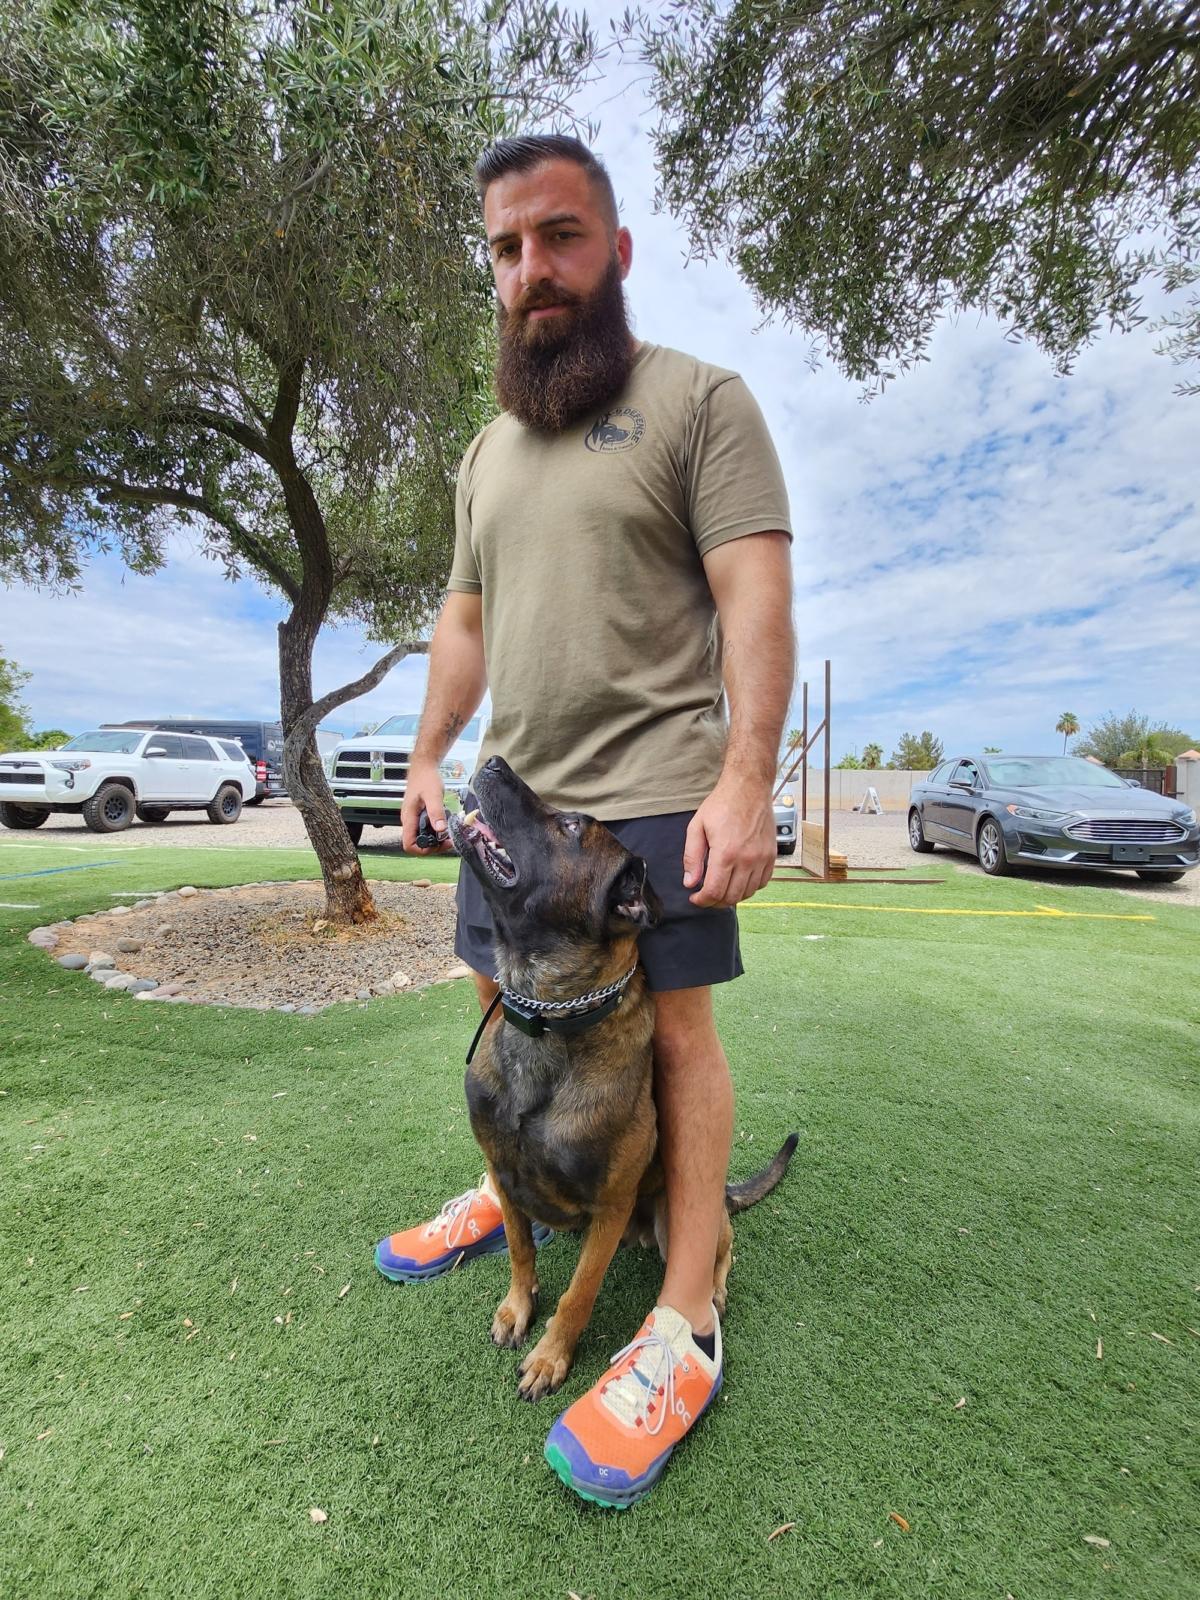 Chris Kamma of K9 Defense in Scottsdale, Ariz., instructs protection dog "Ditto" to stay by his feet on July 11, 2023. (Allan Stein/The Epoch Times)